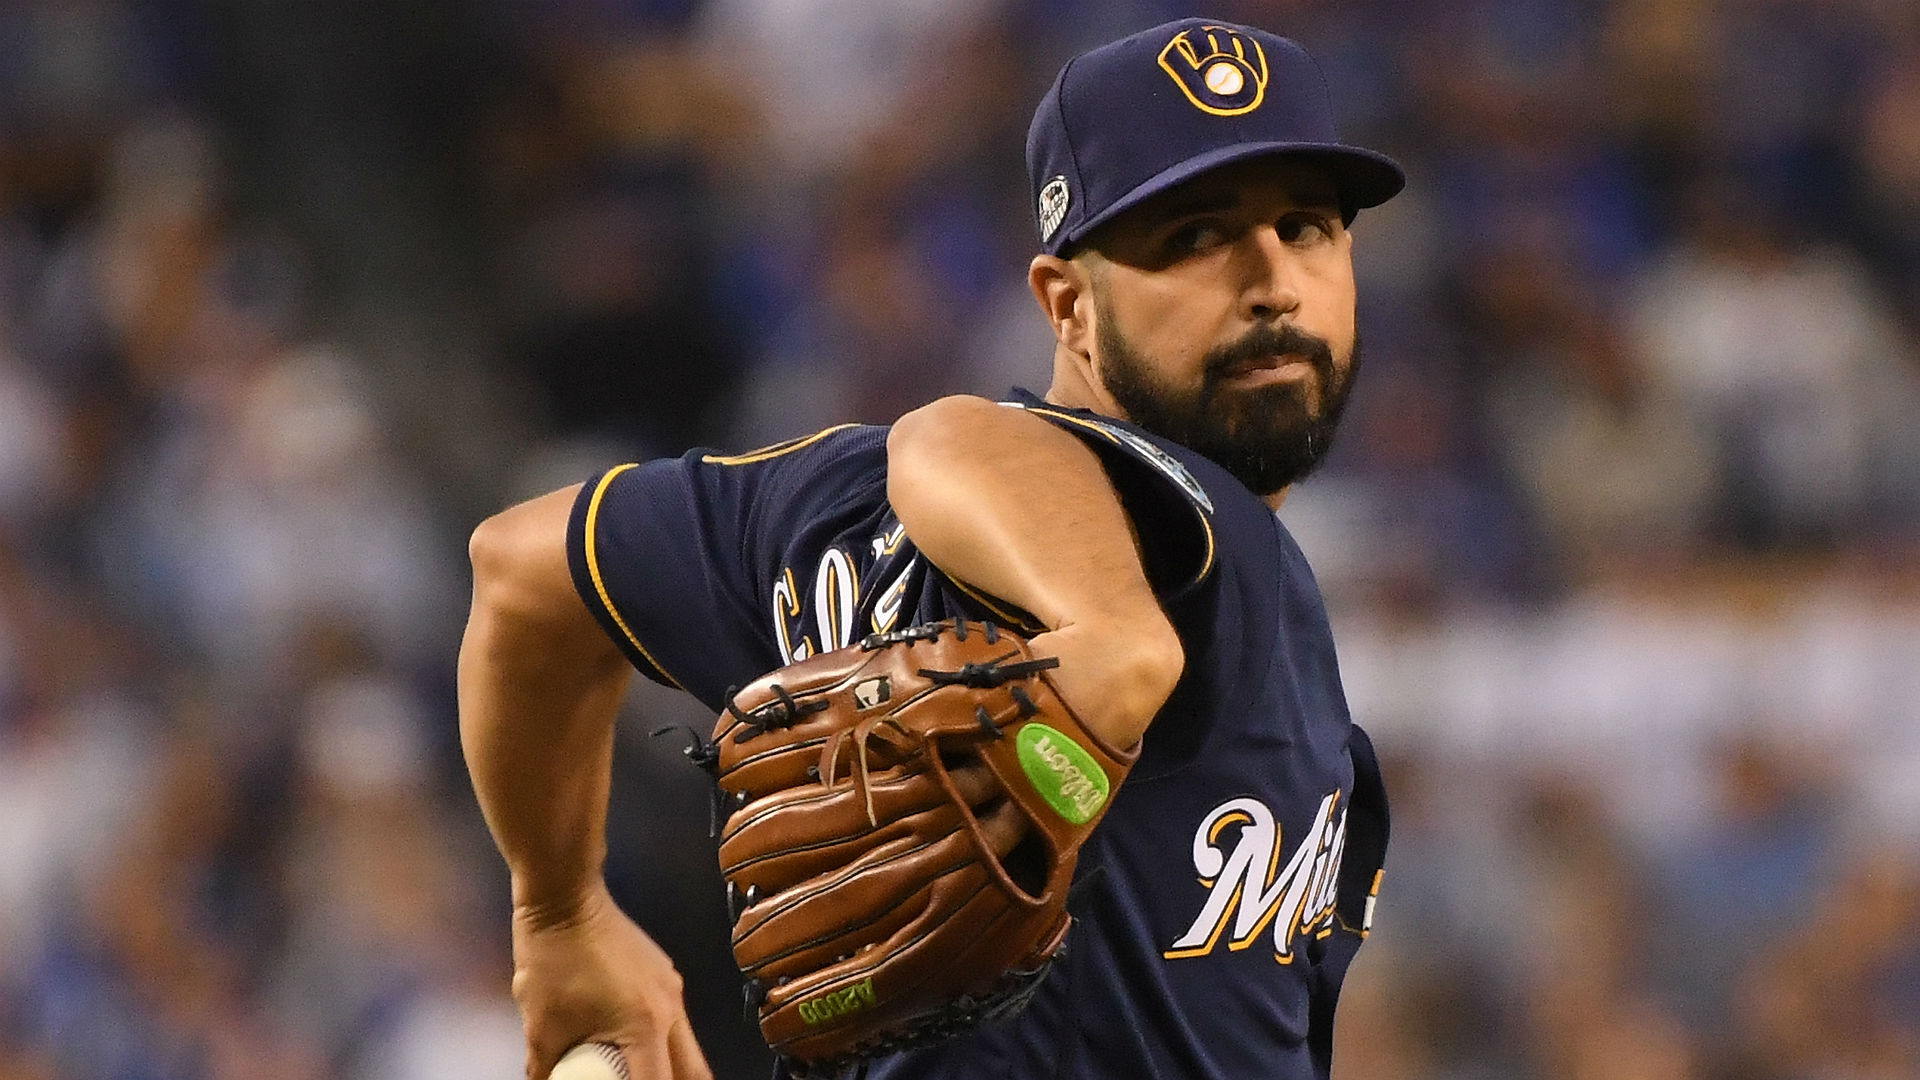 The Mets were “minimally interested” in Gonzalez during the offseason but are “more intrigued now,” according to a report from SNY.